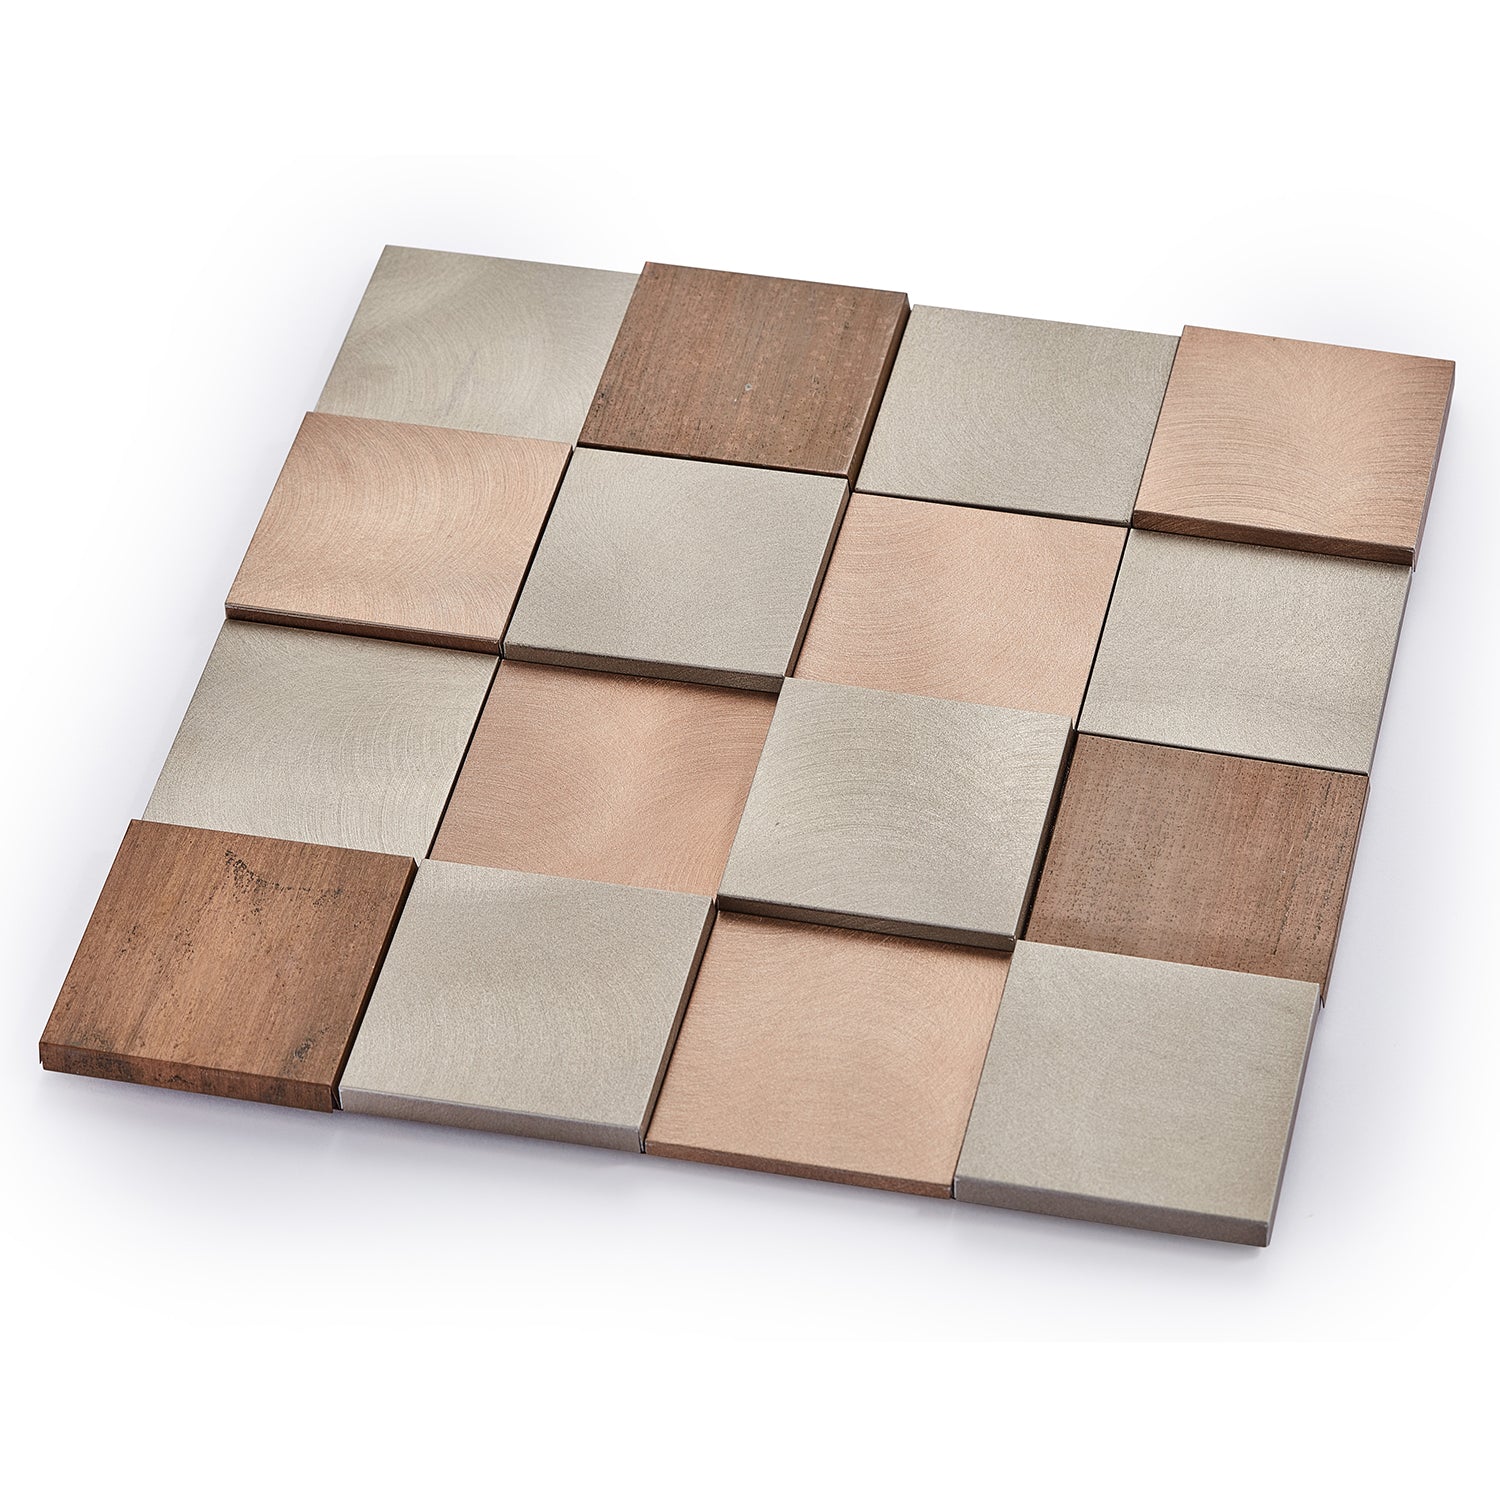 Mijas Peel-and-Stick Mosaic Tile in Copper